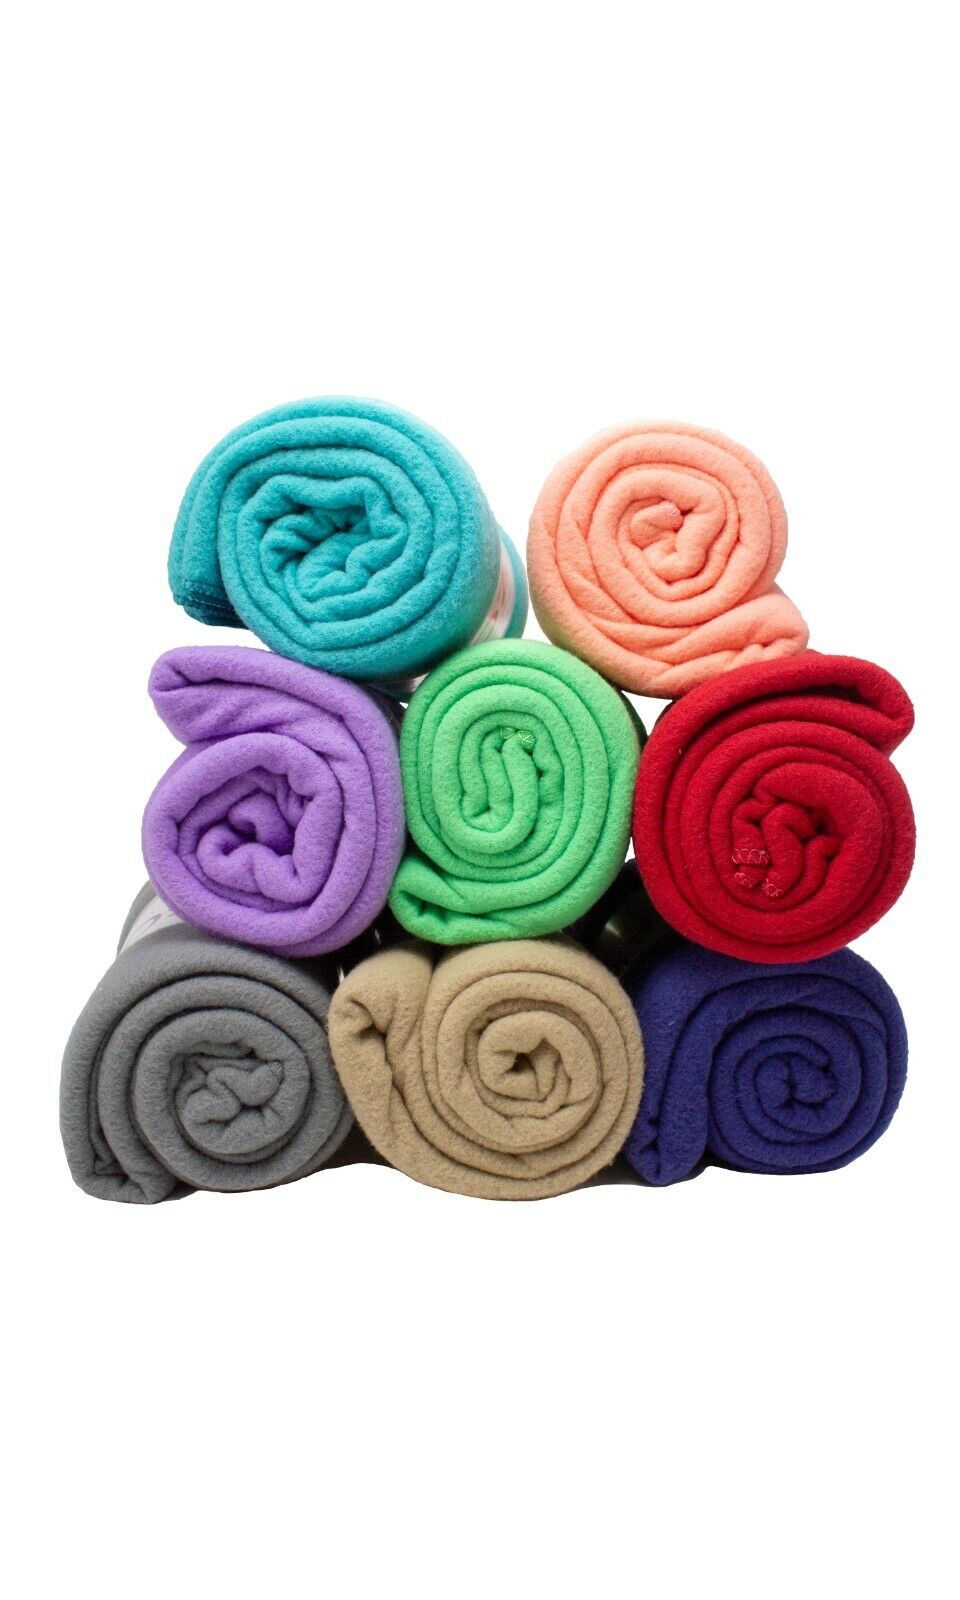 24 Pack of Polar Fleece Throw Blankets - 50 x 60 Assorted Colors Soft & Cozy  Arkwright Does Not Apply - фотография #11